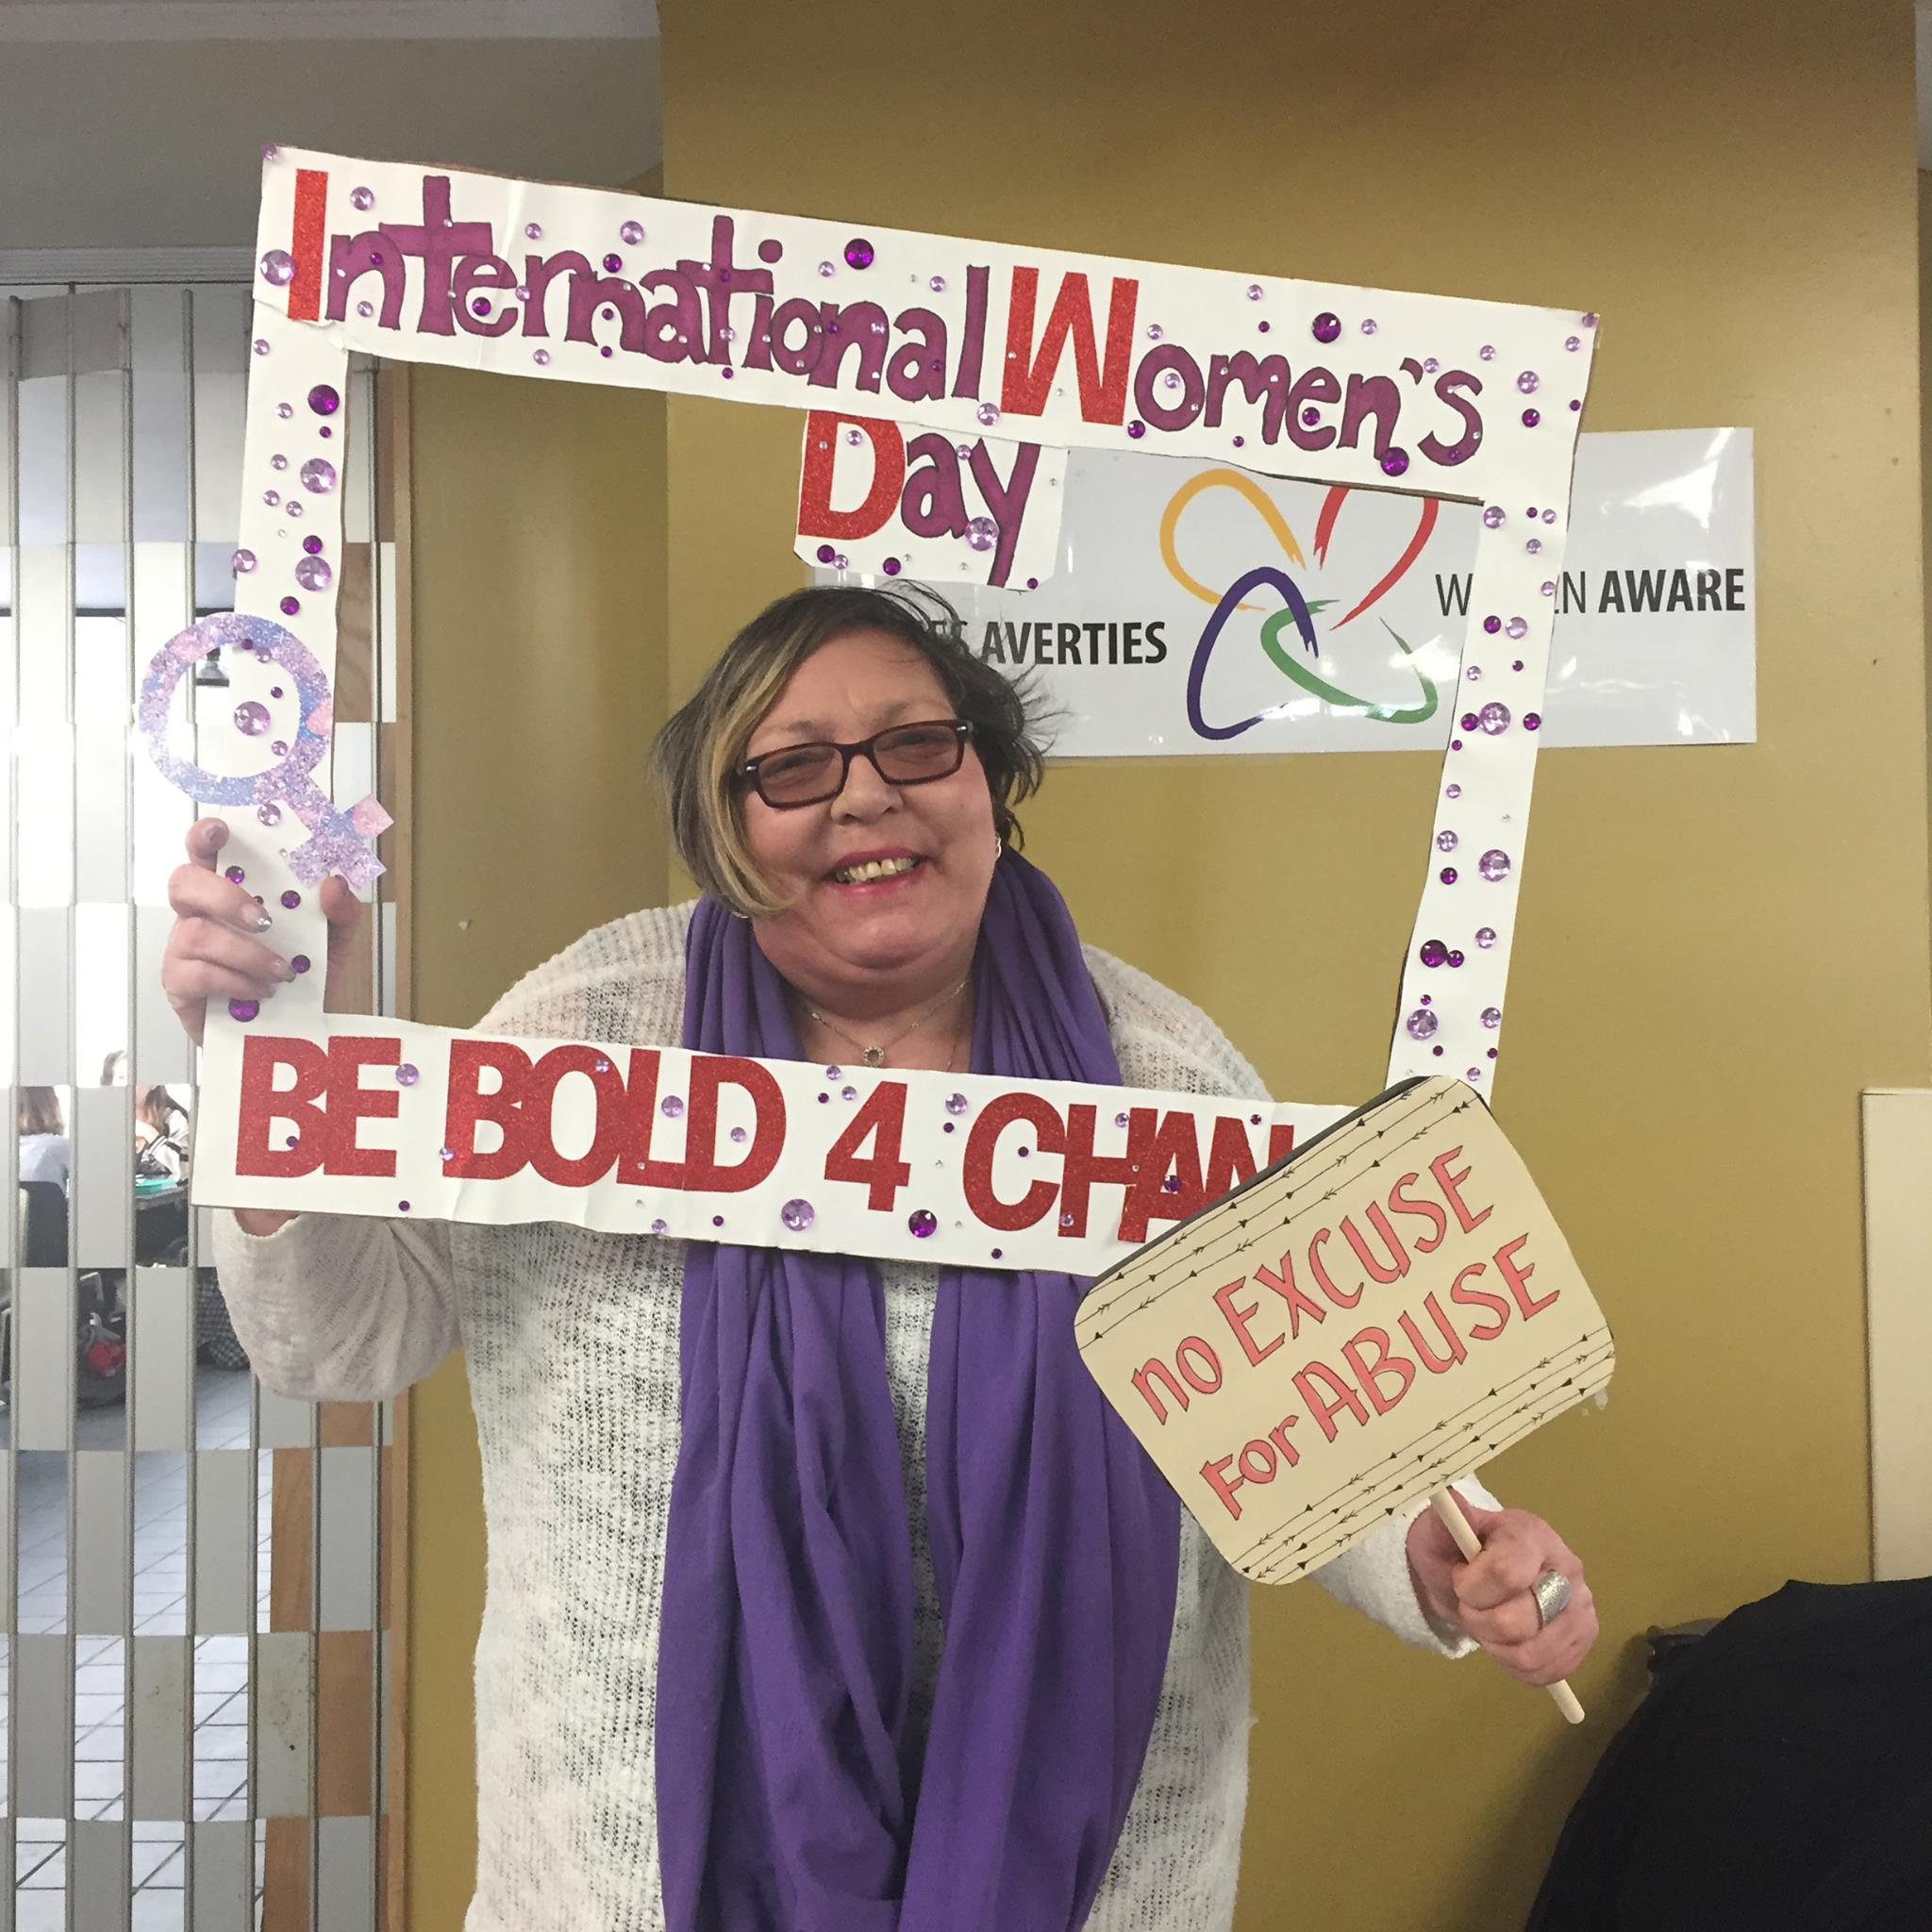 June is standing and holding up a sign abour Internaitonal Women's Day that says "Be Bold 4 Change"